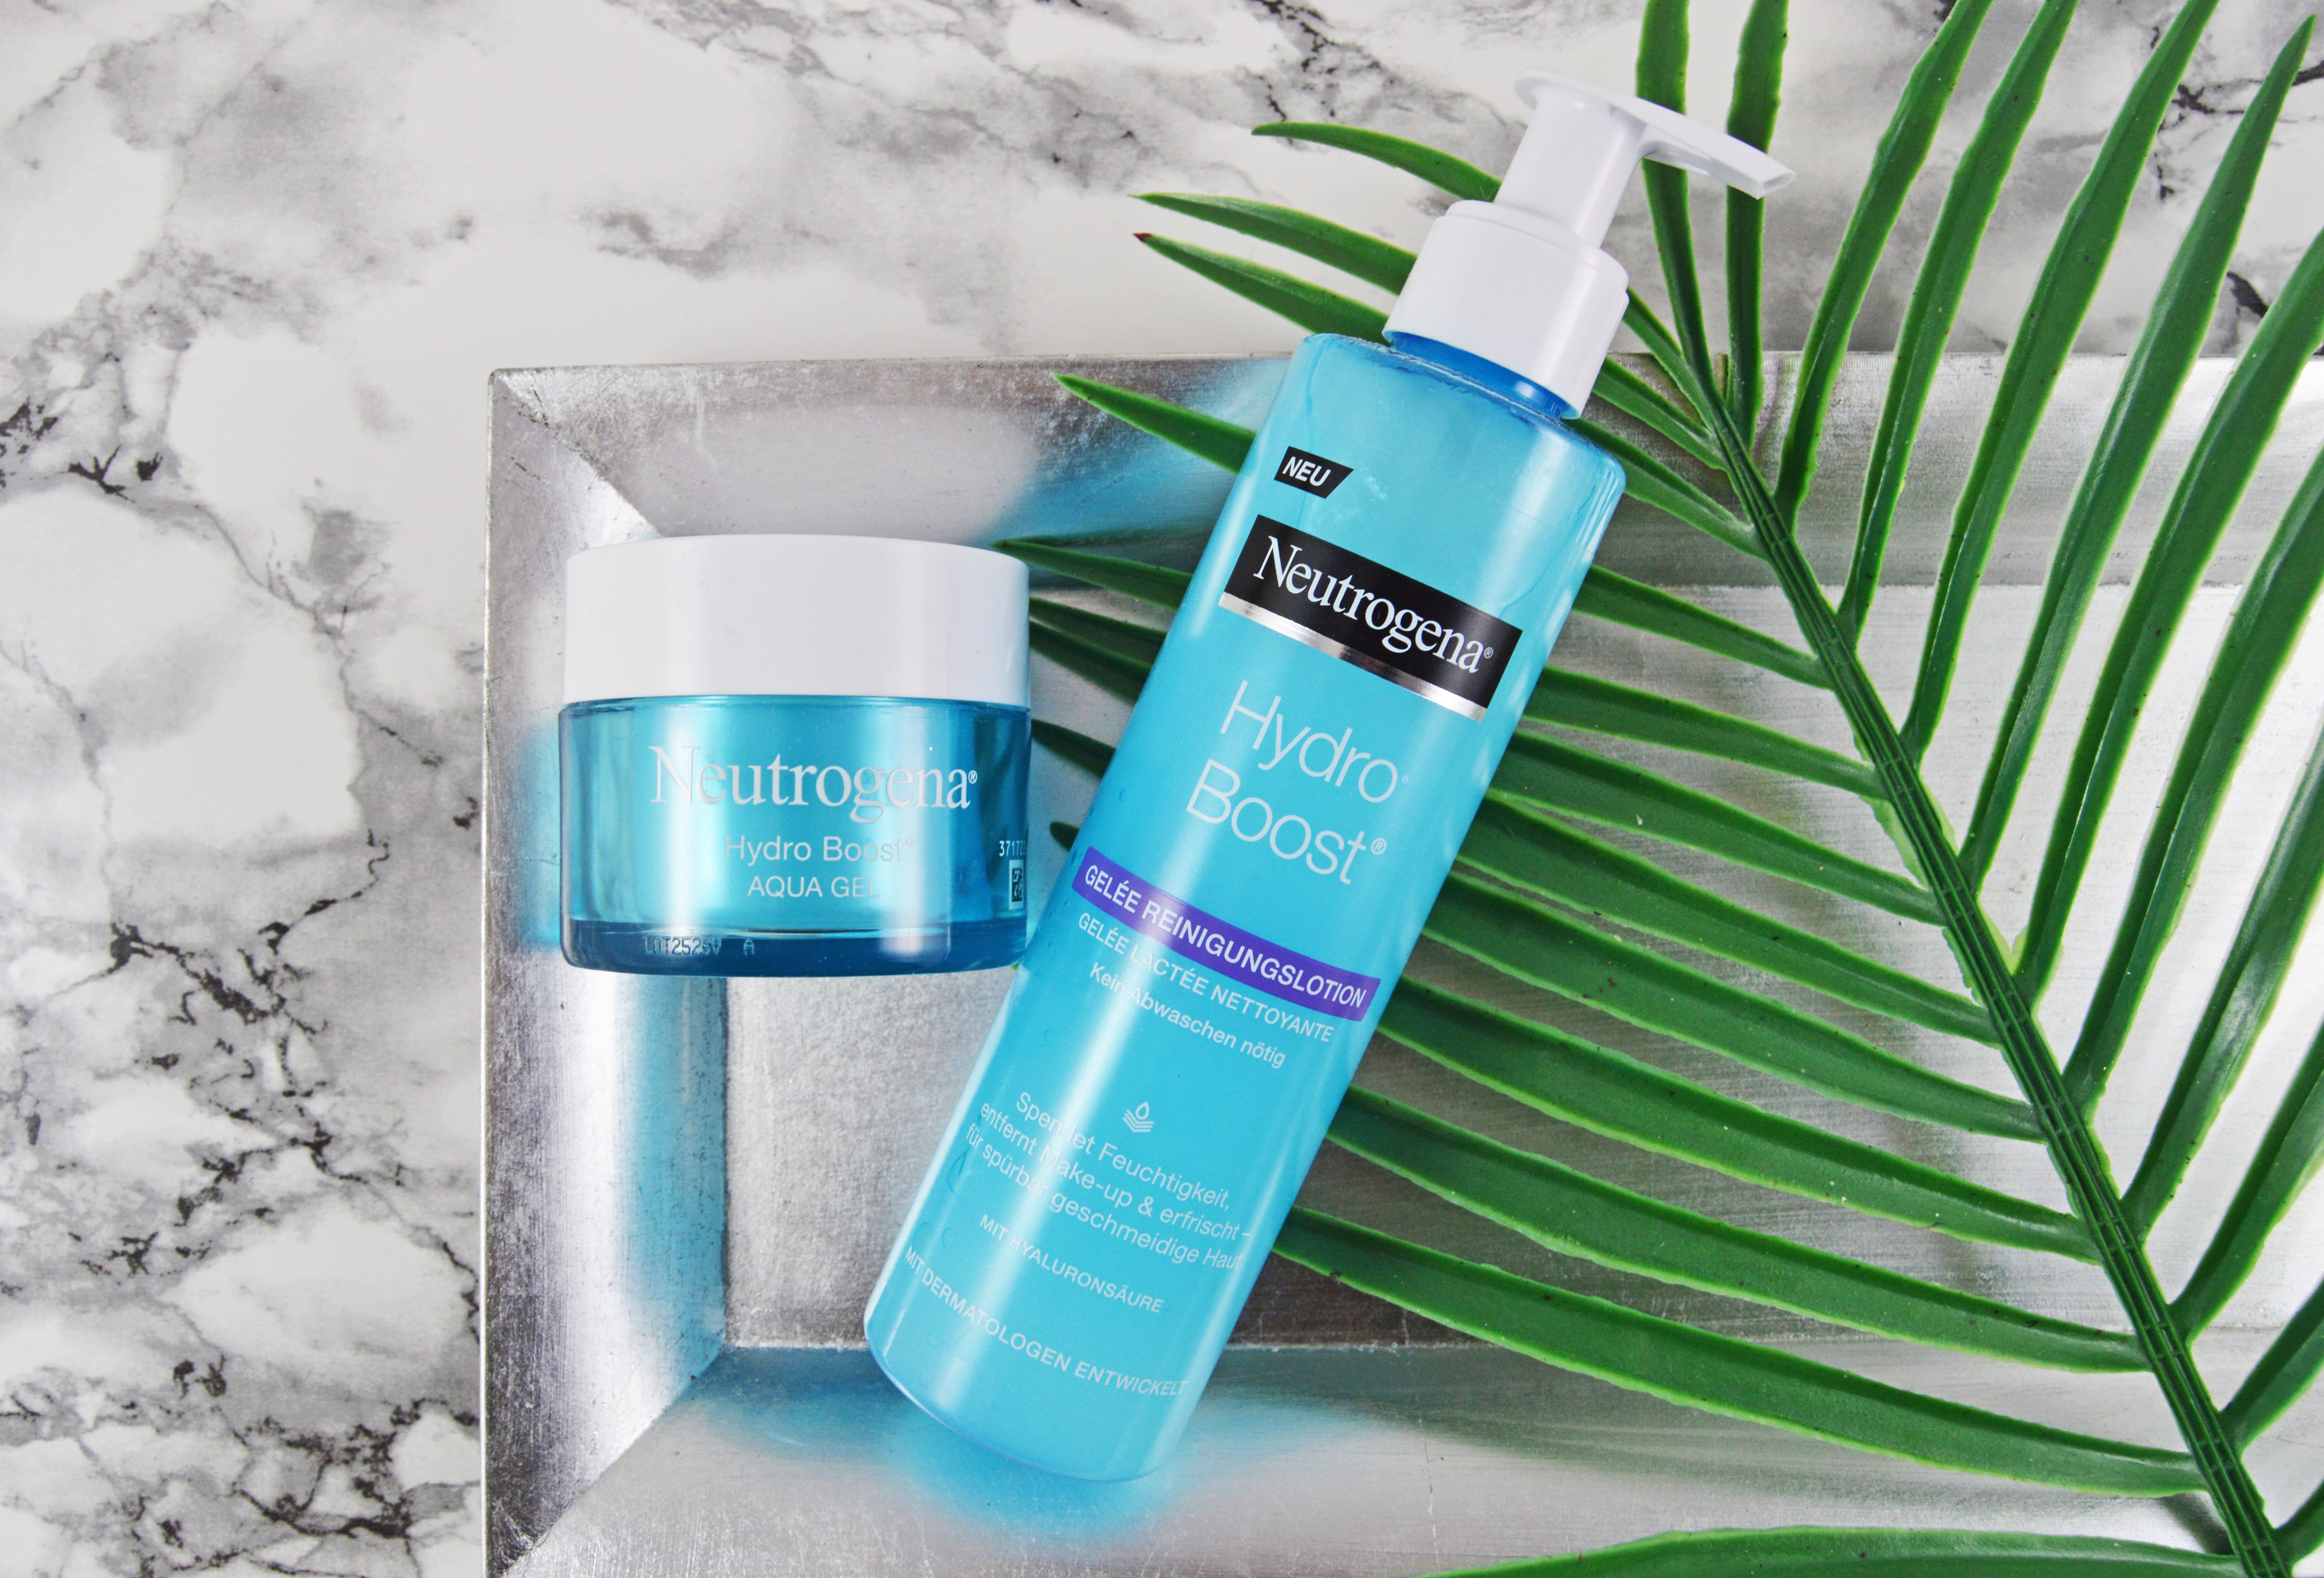 skolde middag Spectacle Review: Neutrogena Hydro Boost care & cleansing products | The Chic Advocate